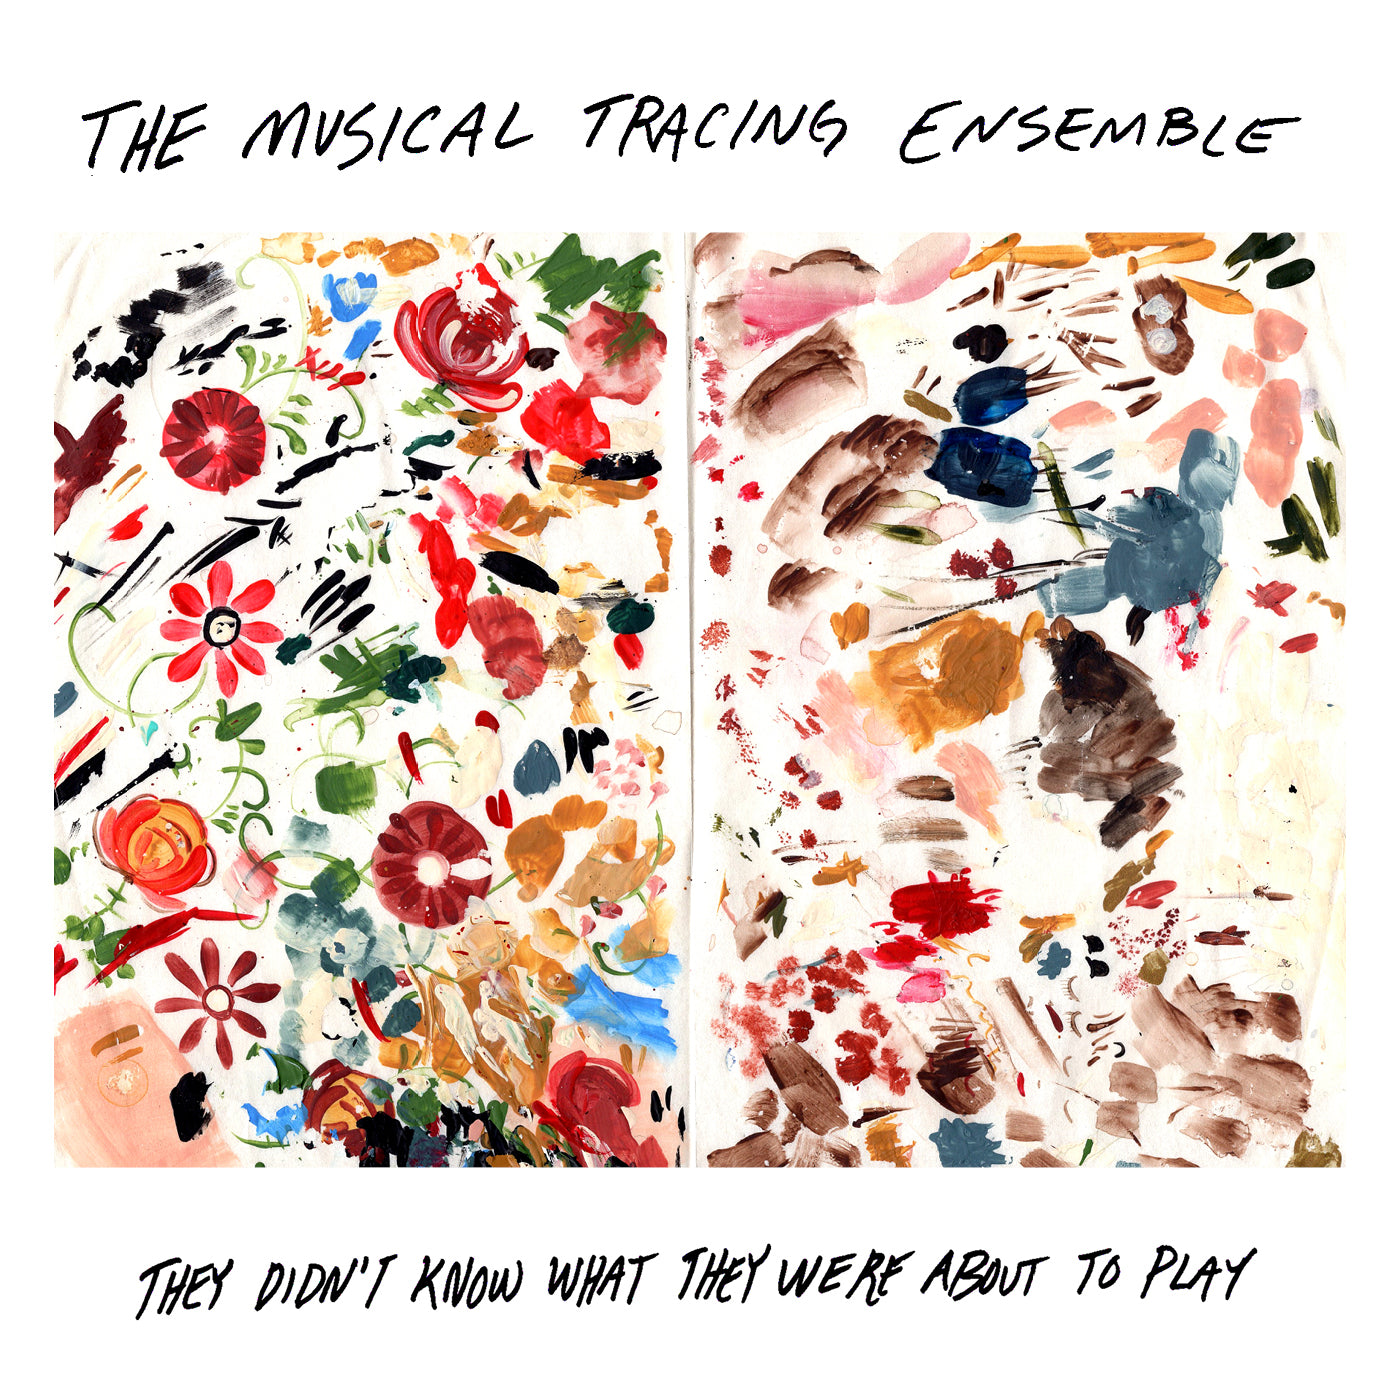 THE MUSICAL TRACING ENSEMBLE | Cassette Release Show